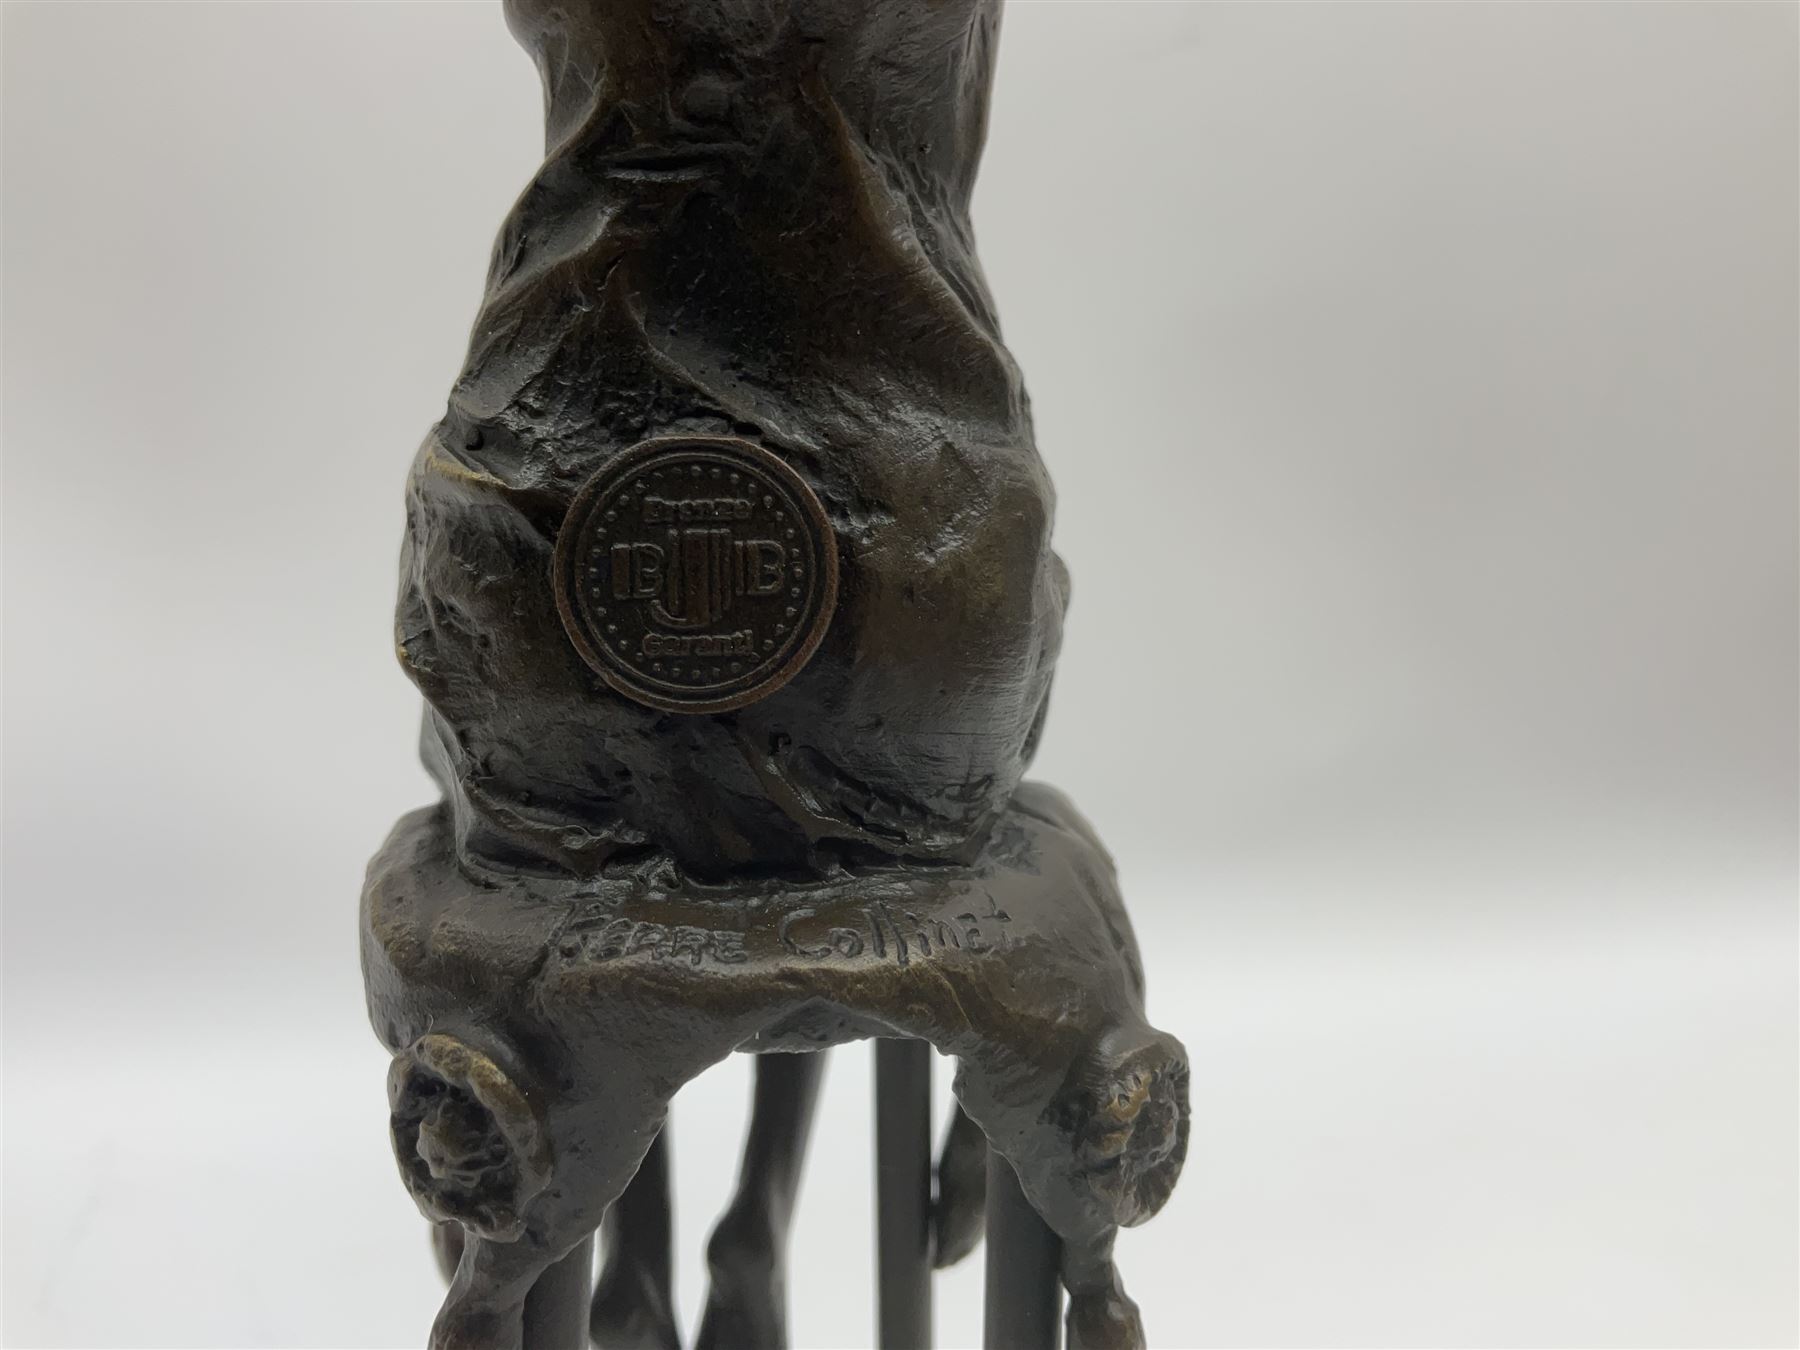 Art Deco style bronze modelled as a female figure seated upon a chair - Image 5 of 8